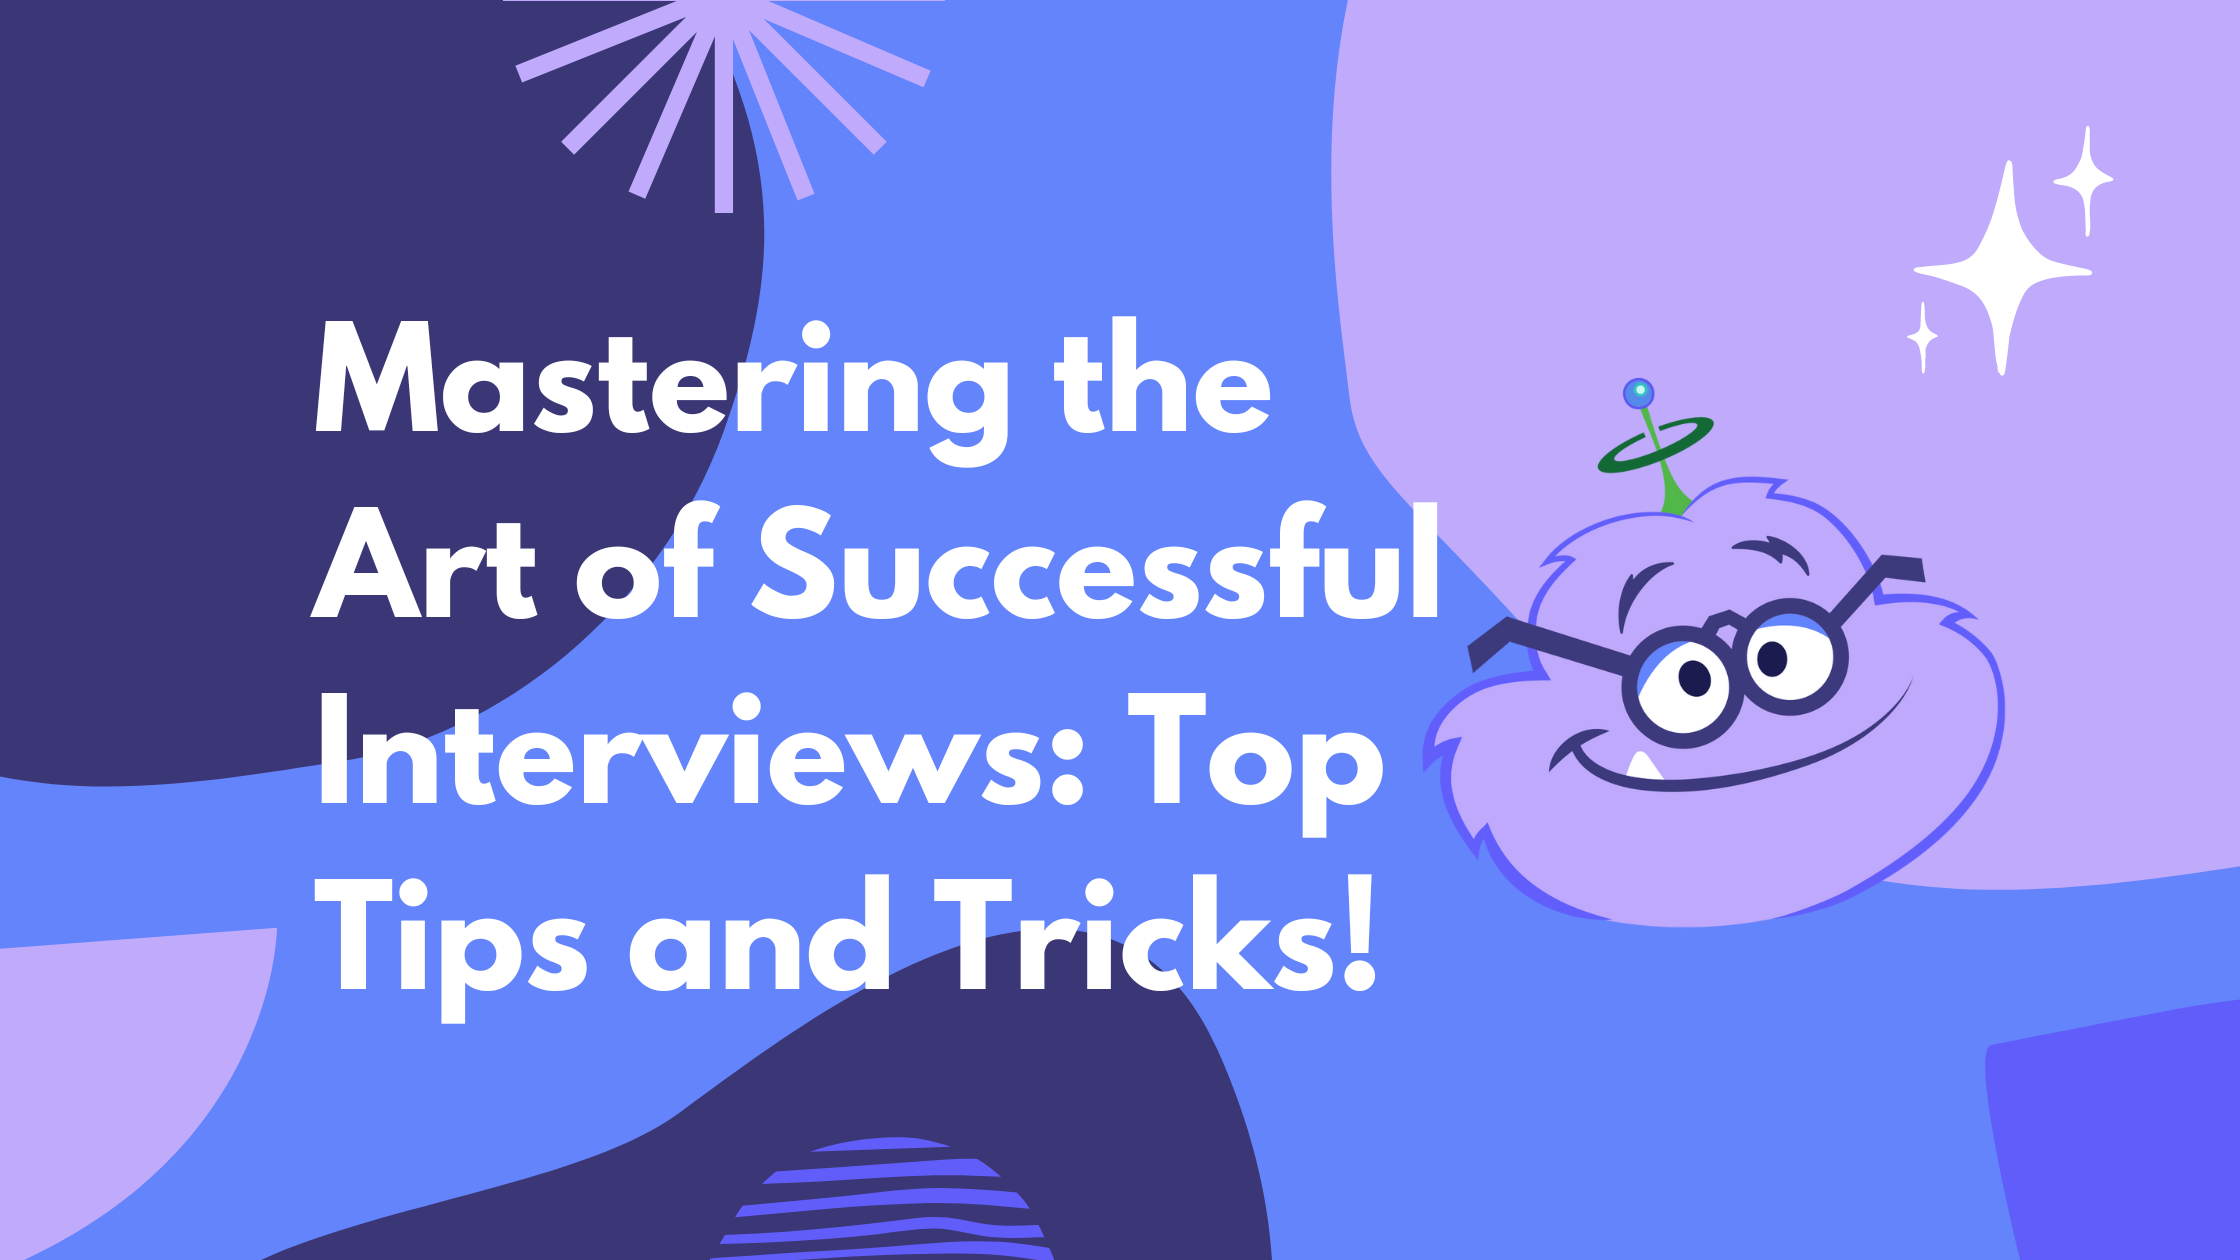 Mastering the Art of Successful Interviews: Top Tips and Tricks!